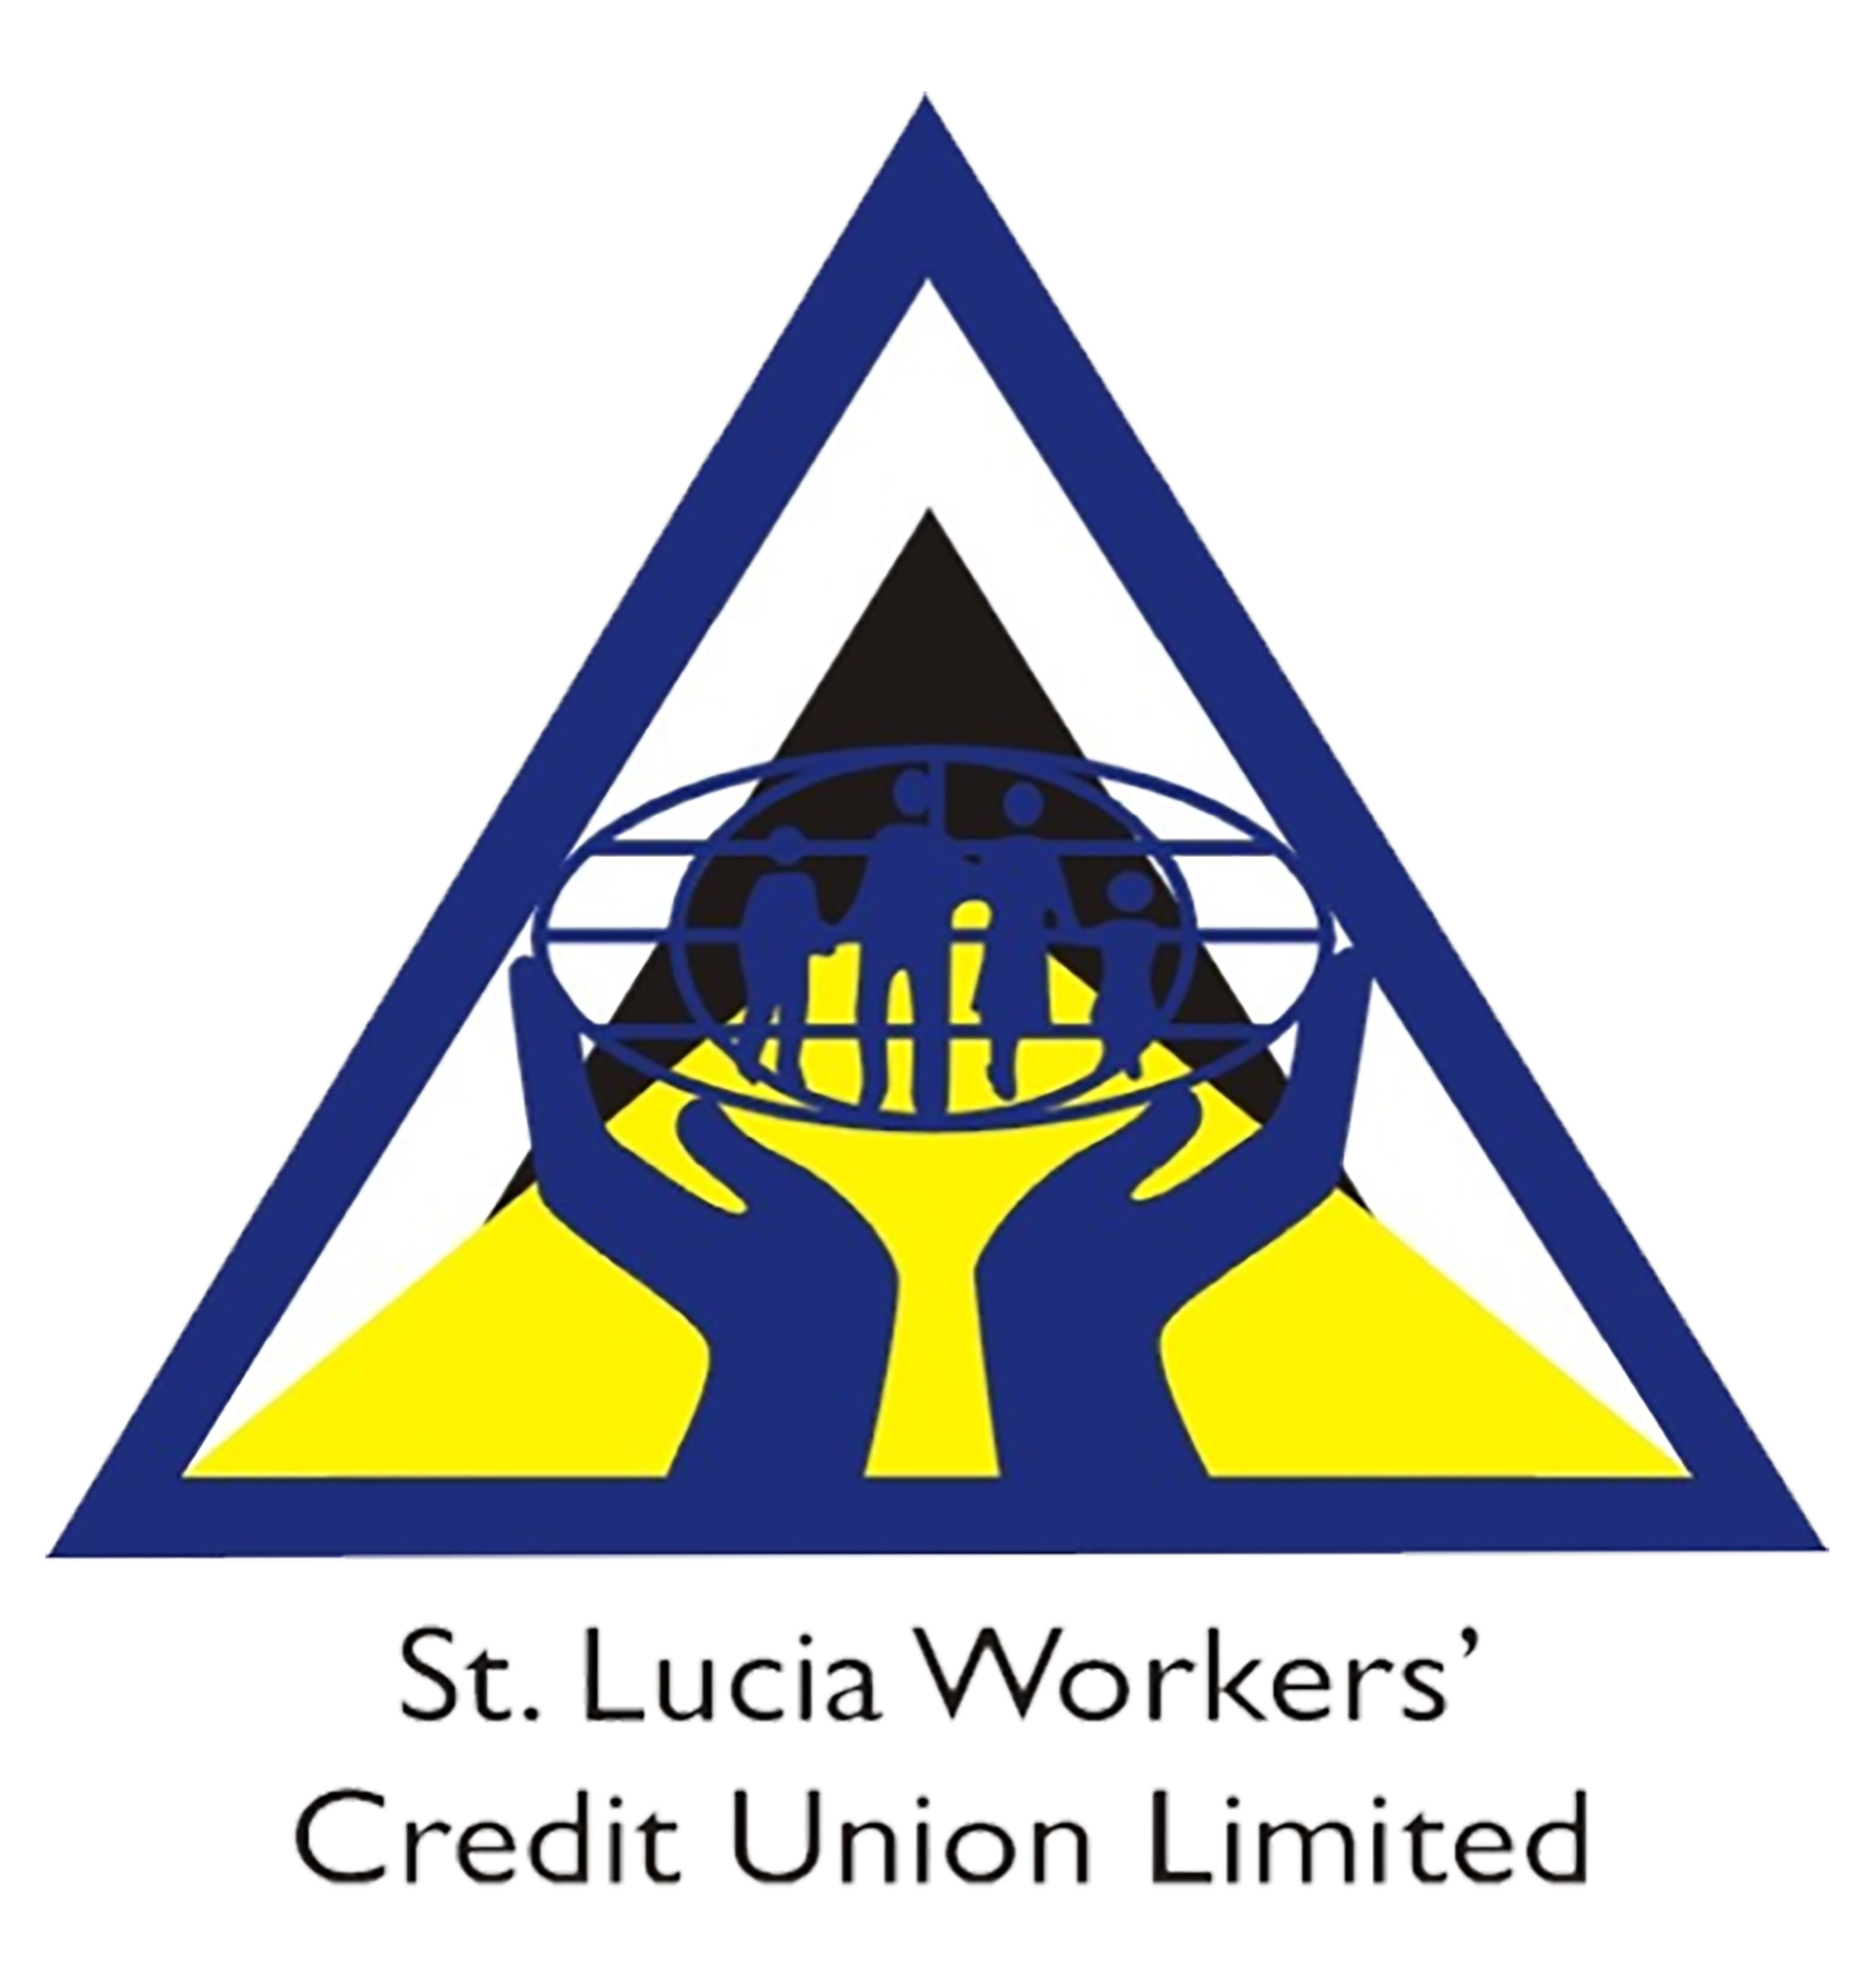 St. Lucia Workers' Credit Union